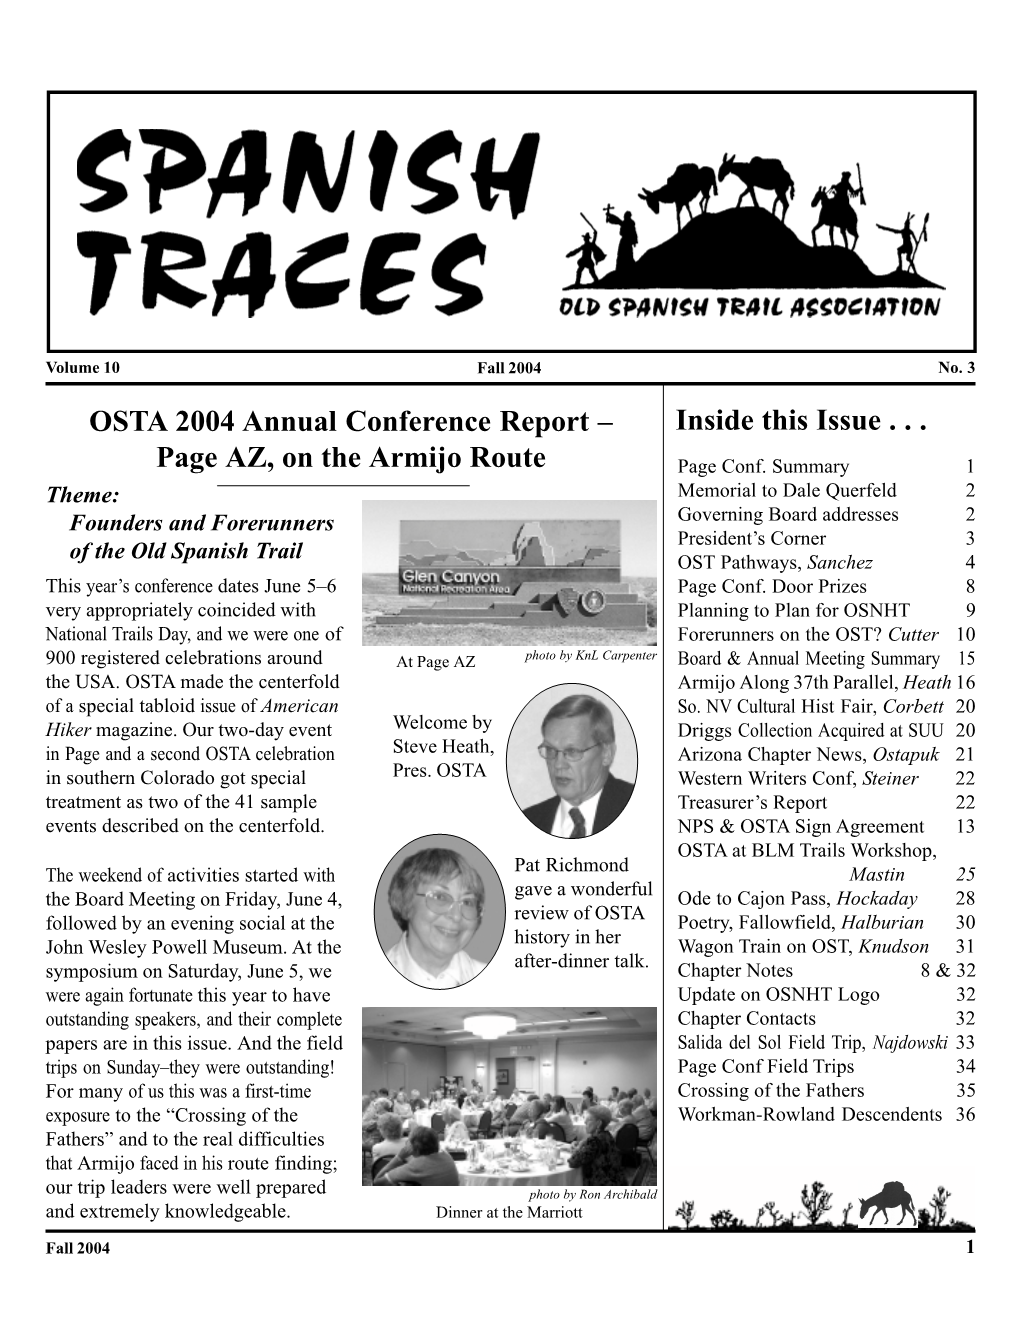 OSTA 2004 Annual Conference Report – Page AZ, on the Armijo Route